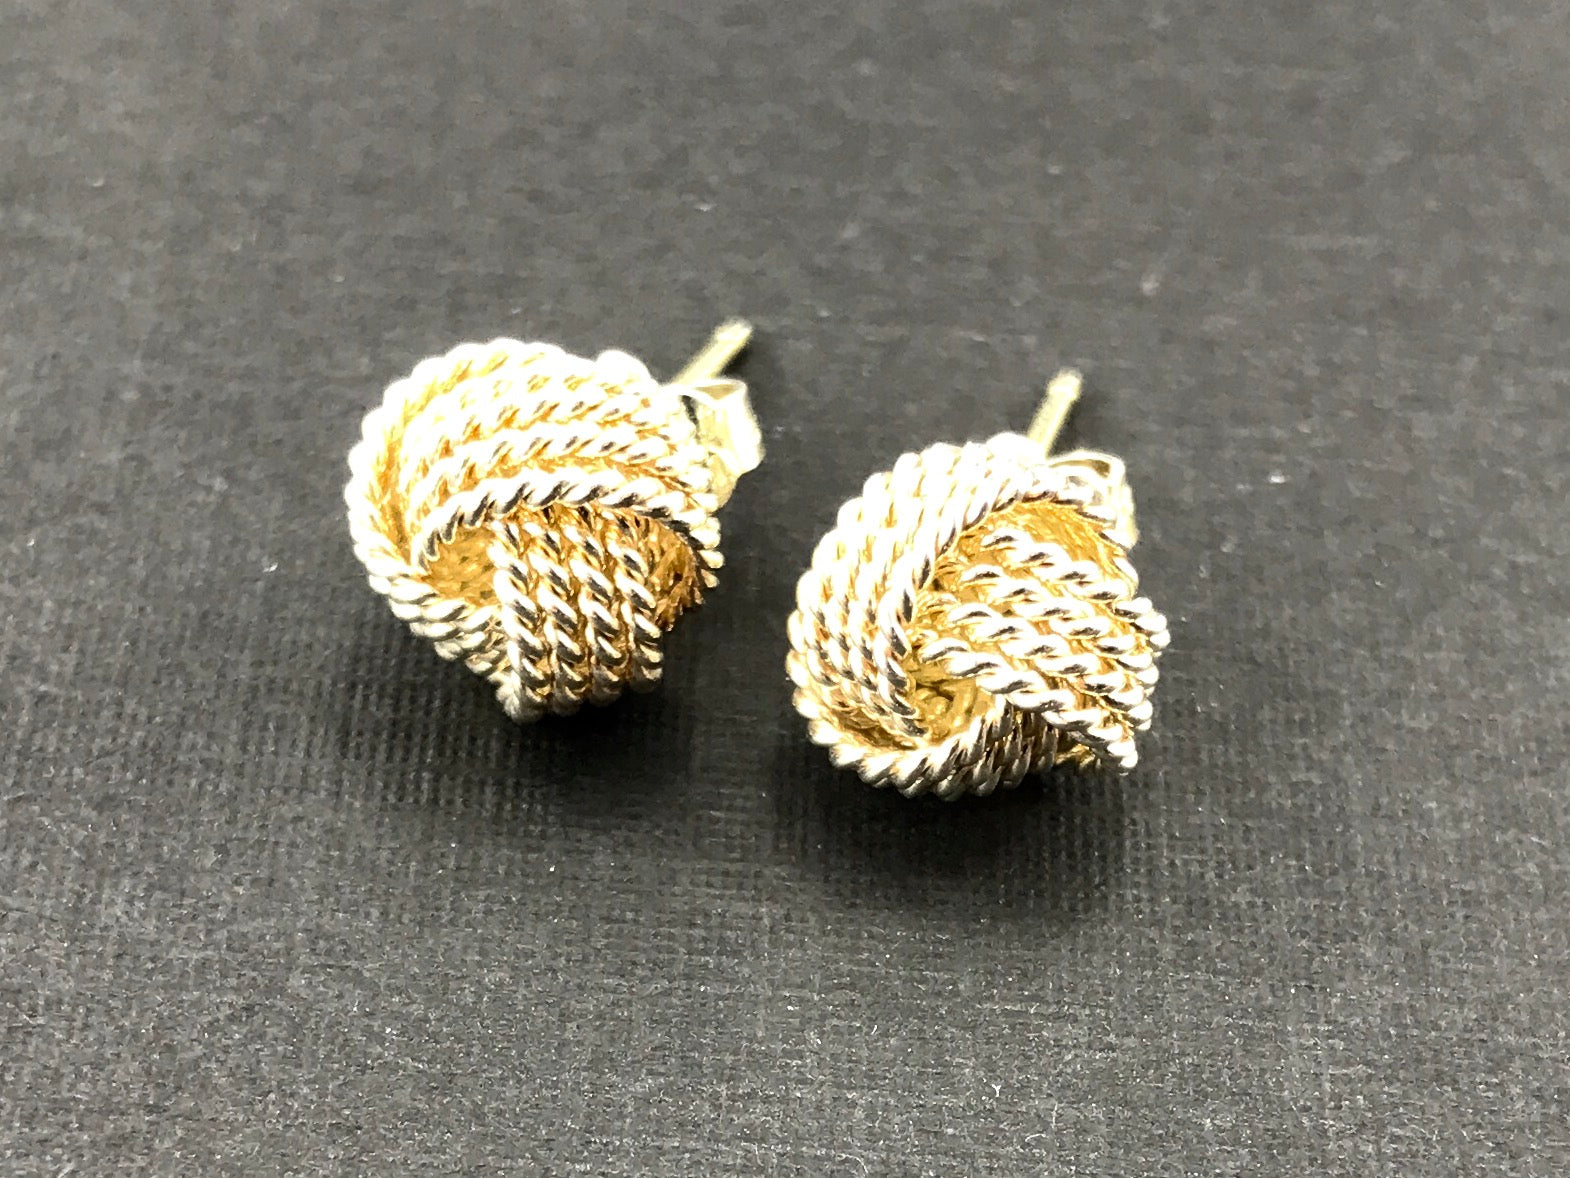 14k Yellow Gold Ball Stud Earrings with Secure Screw-backs, Yellow Gold :  Buy Online at Best Price in KSA - Souq is now Amazon.sa: Fashion